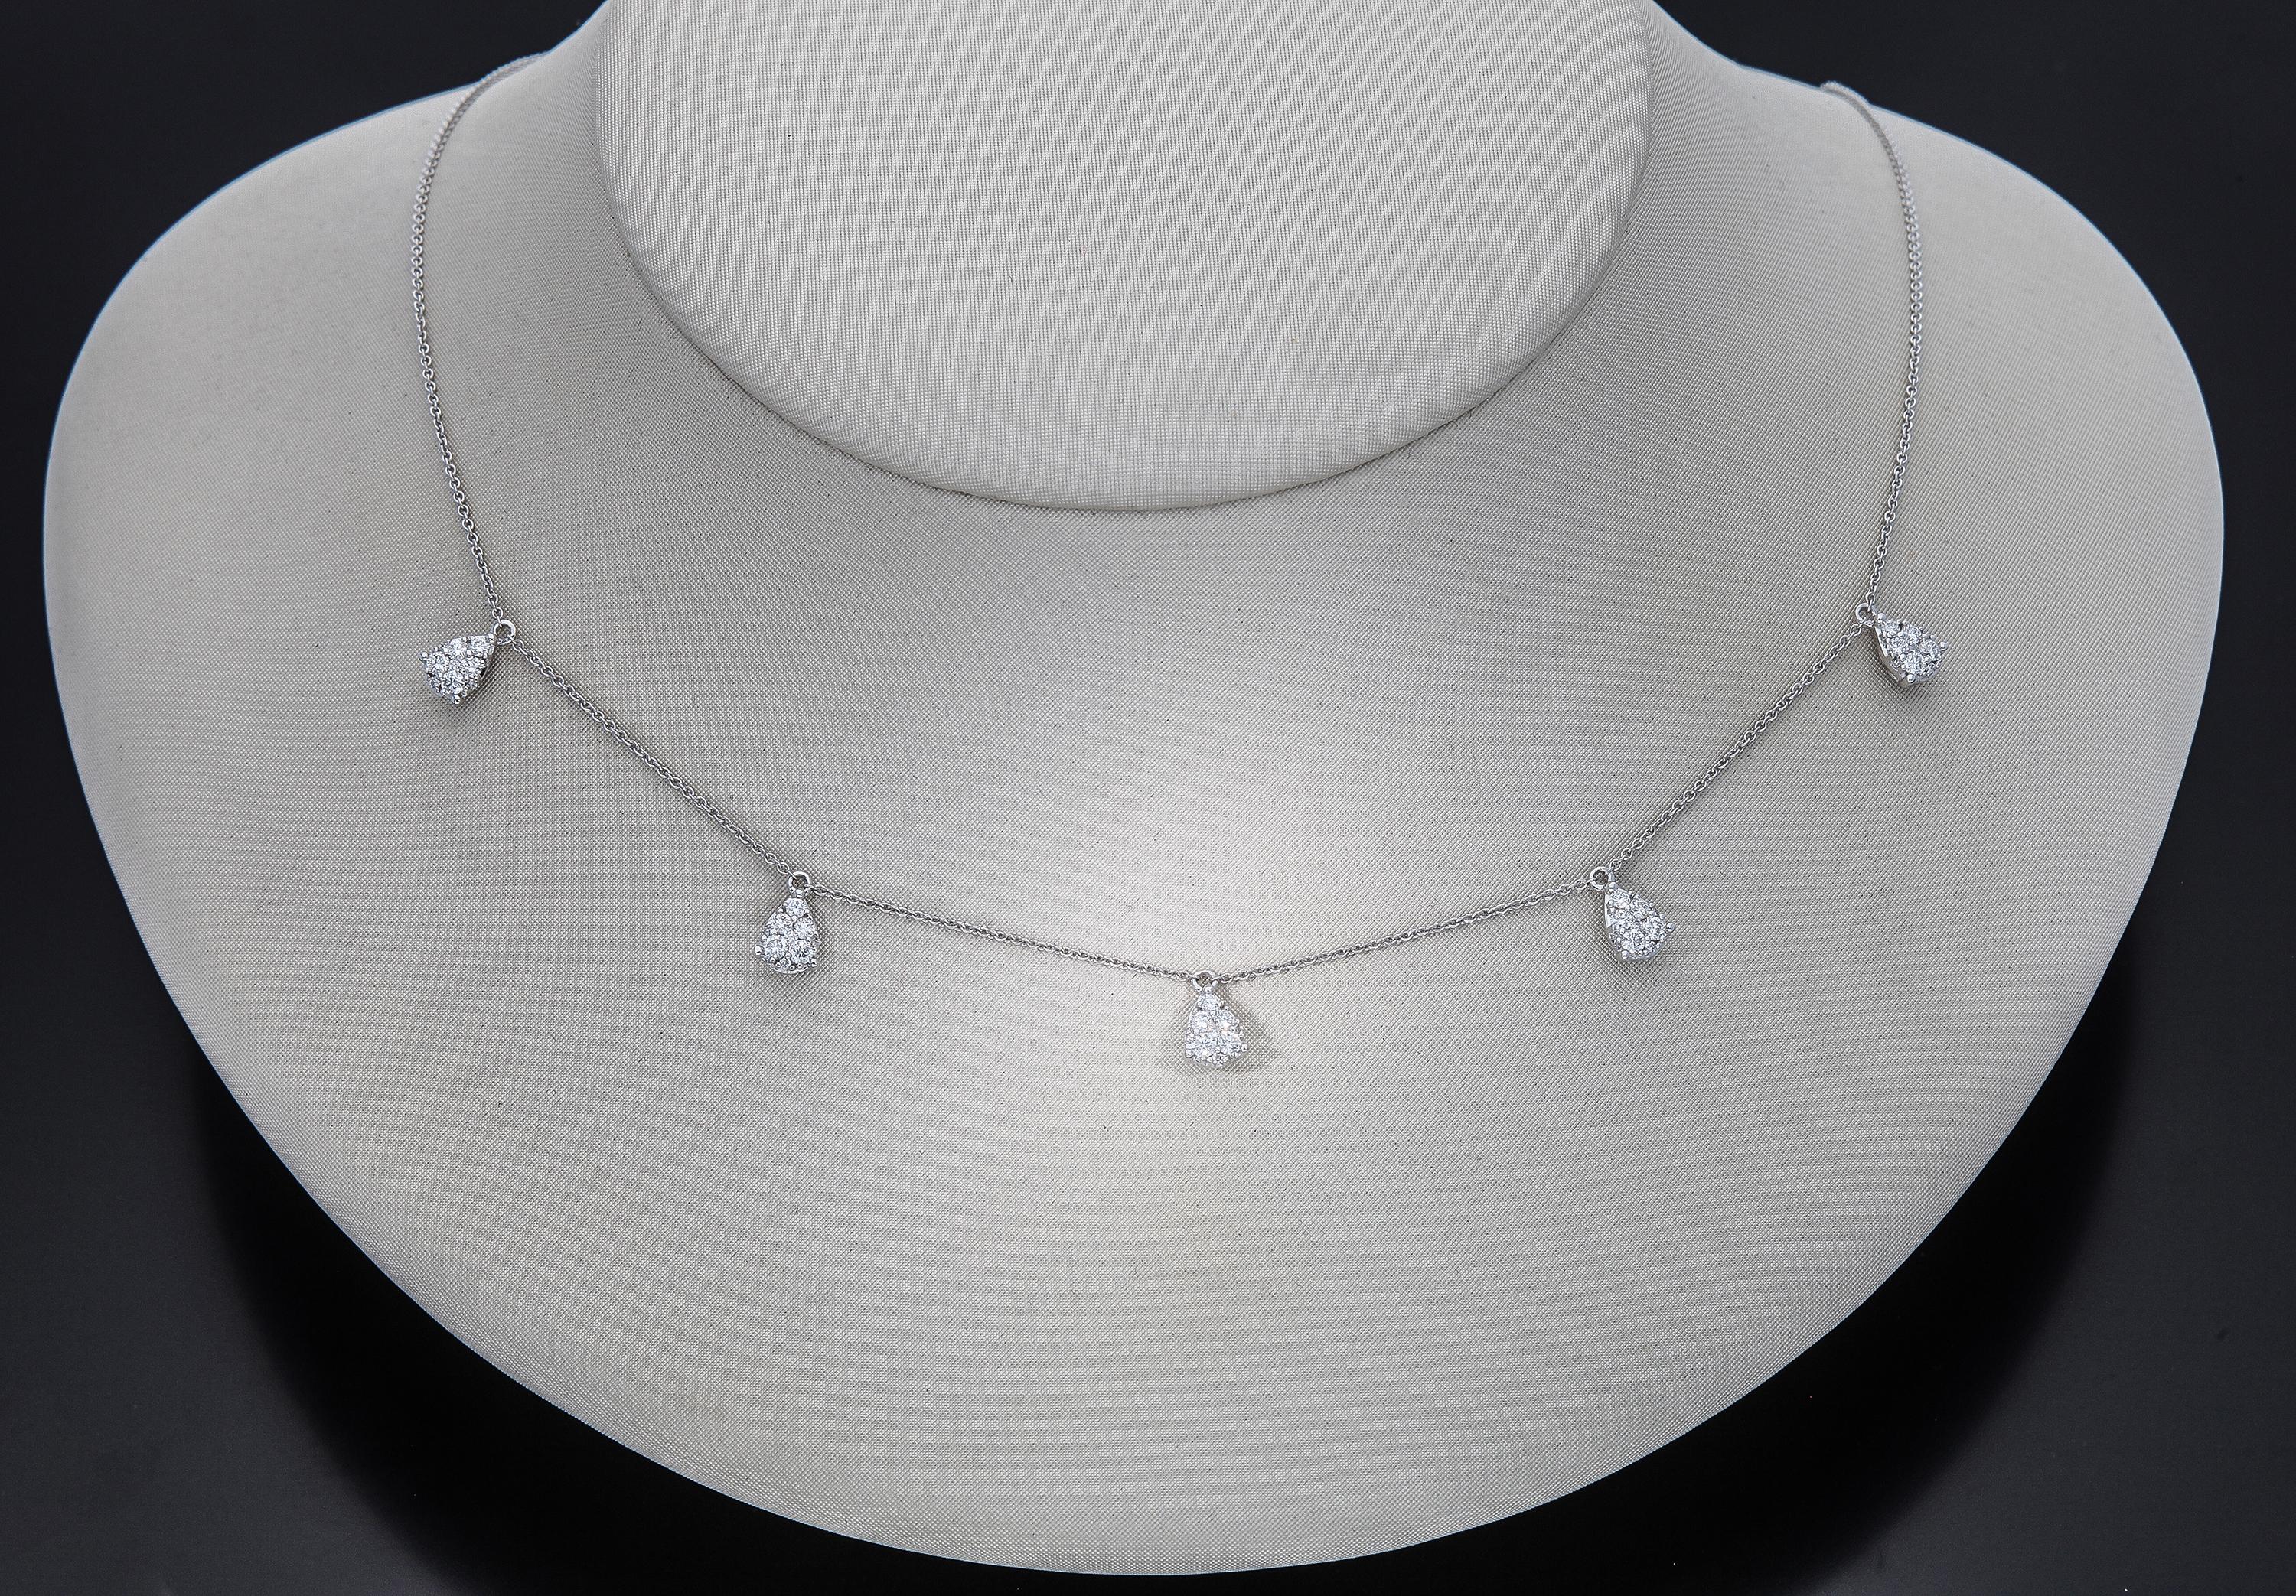 18 Karat White Gold Chain Necklace with Five Drop Pendant with Diamonds For Sale 4